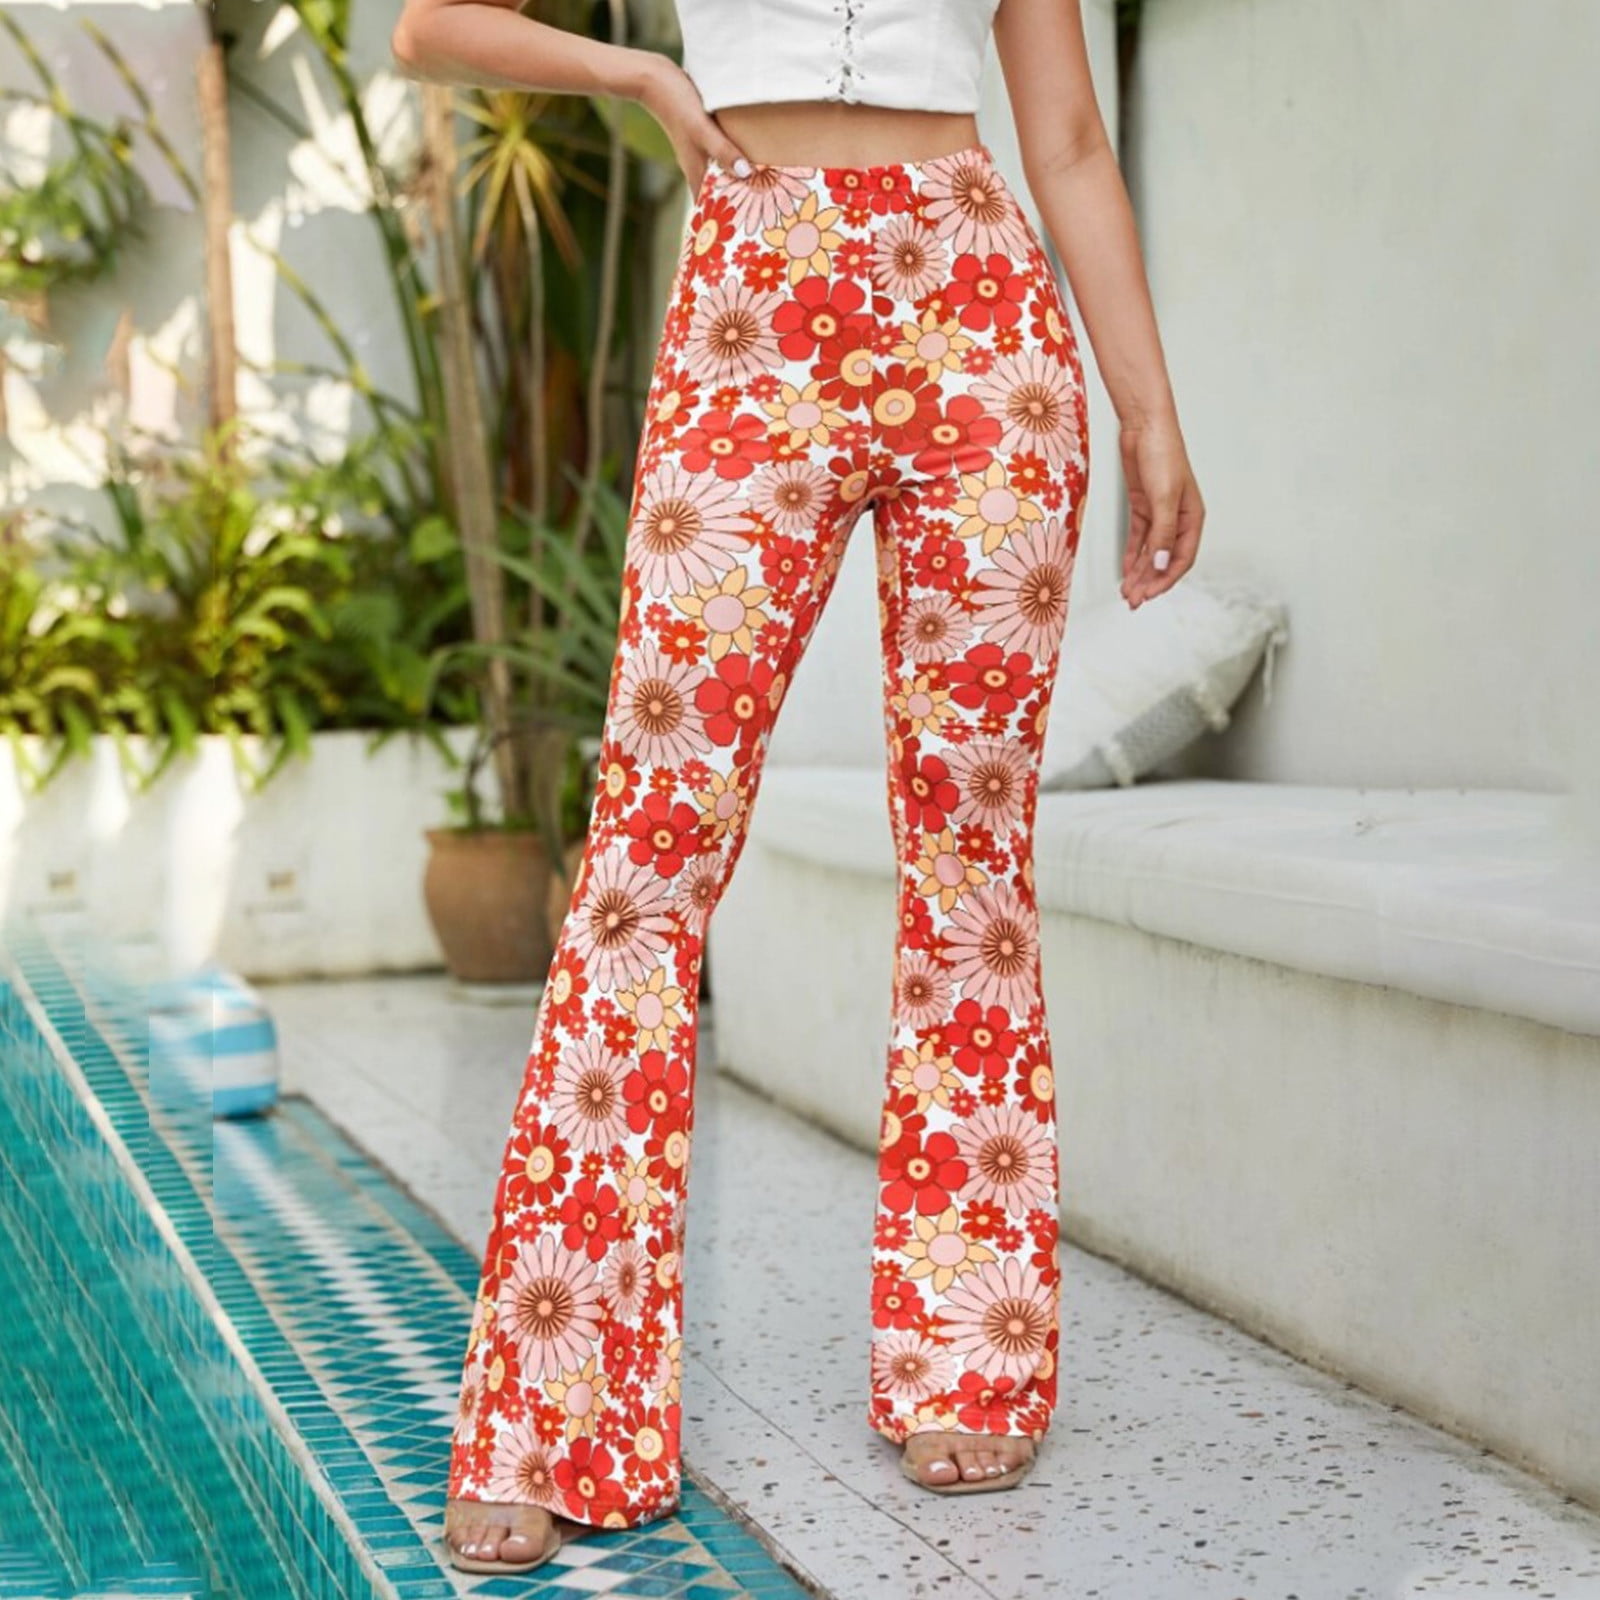 Bell Bottom Pants for Women High Waist Floral Printed Flare Leg Pant  Stretchy Slim-Fit Winter Lounge Ankle Trousers